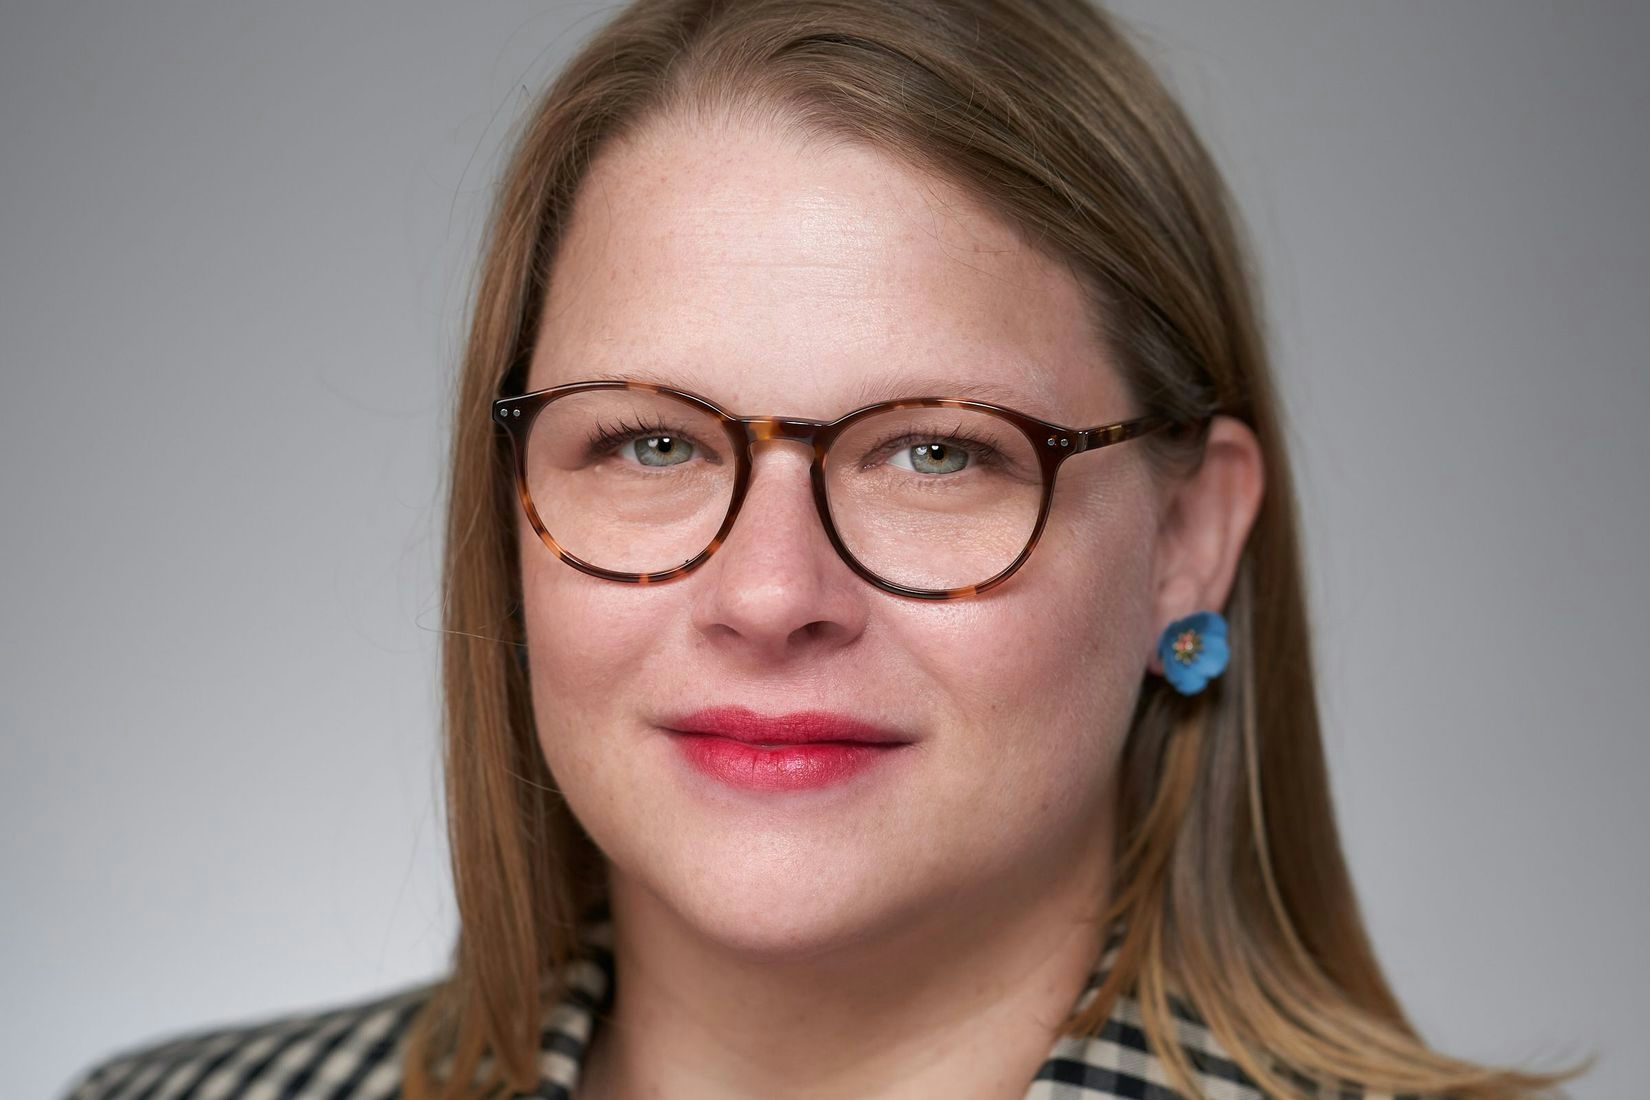 A fair skinned woman with shoulder-length dark blonde hair smiles softly wearing red lipstick, blue flower earrings, a black and white checkered blazer over a black shirt, and tortoise glasses. 